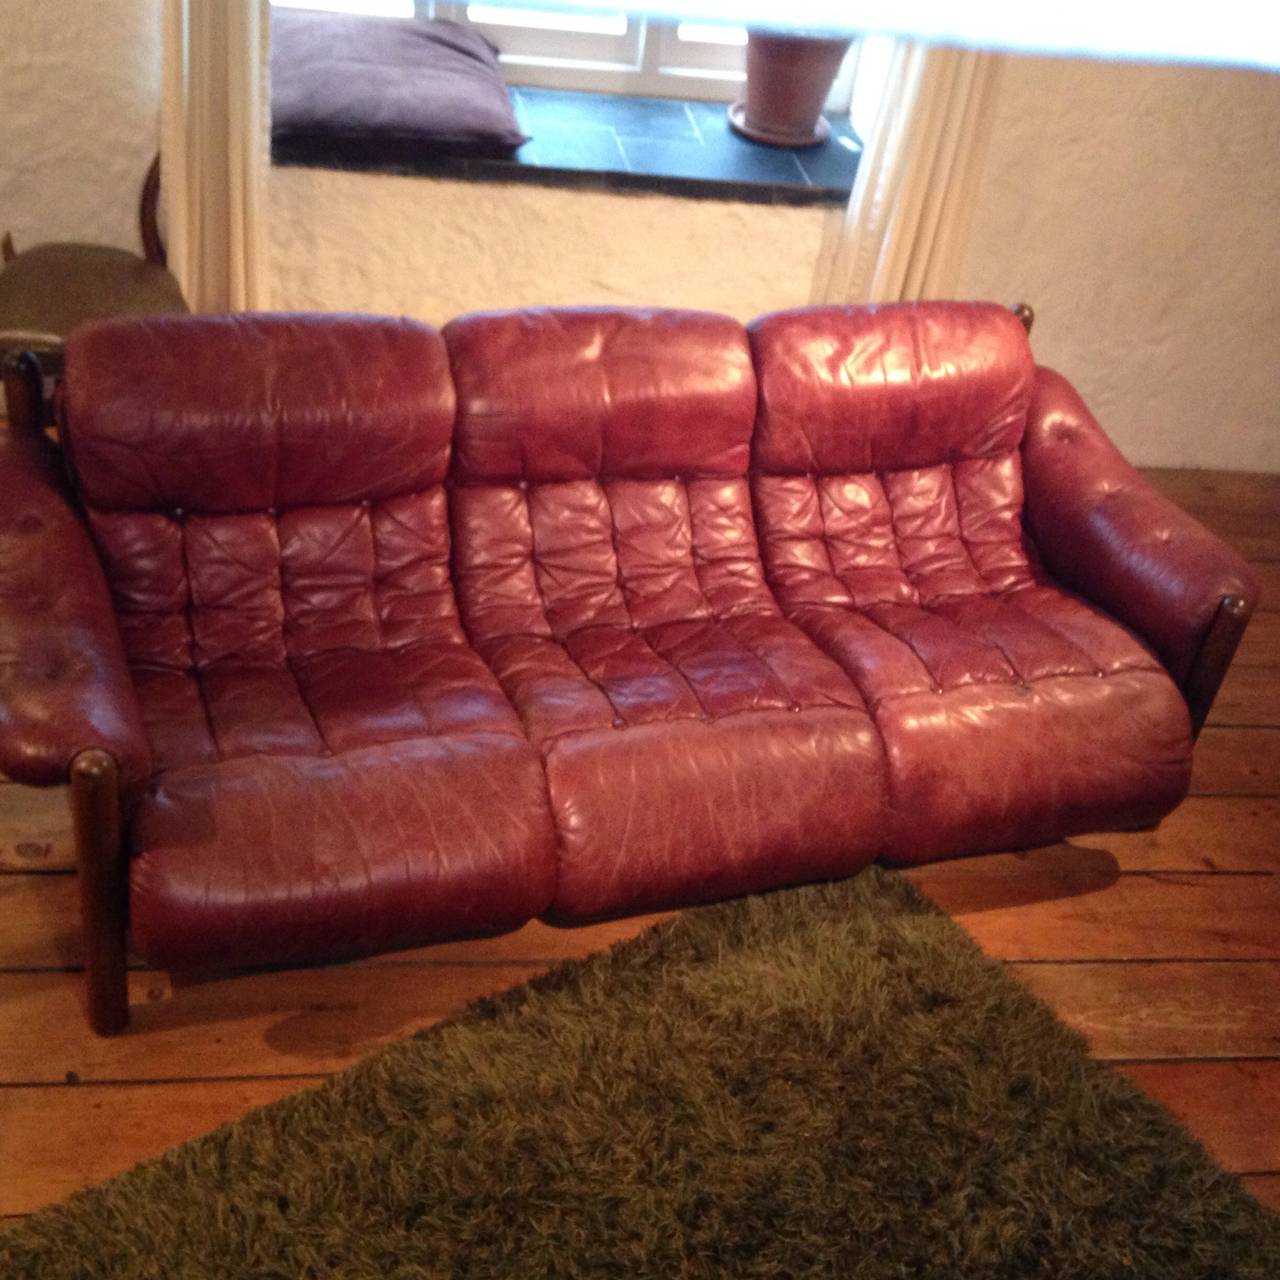 Mid-20th Century Vintage Danish Rosewood Sofa in Oxblood Leather, circa 1960s For Sale